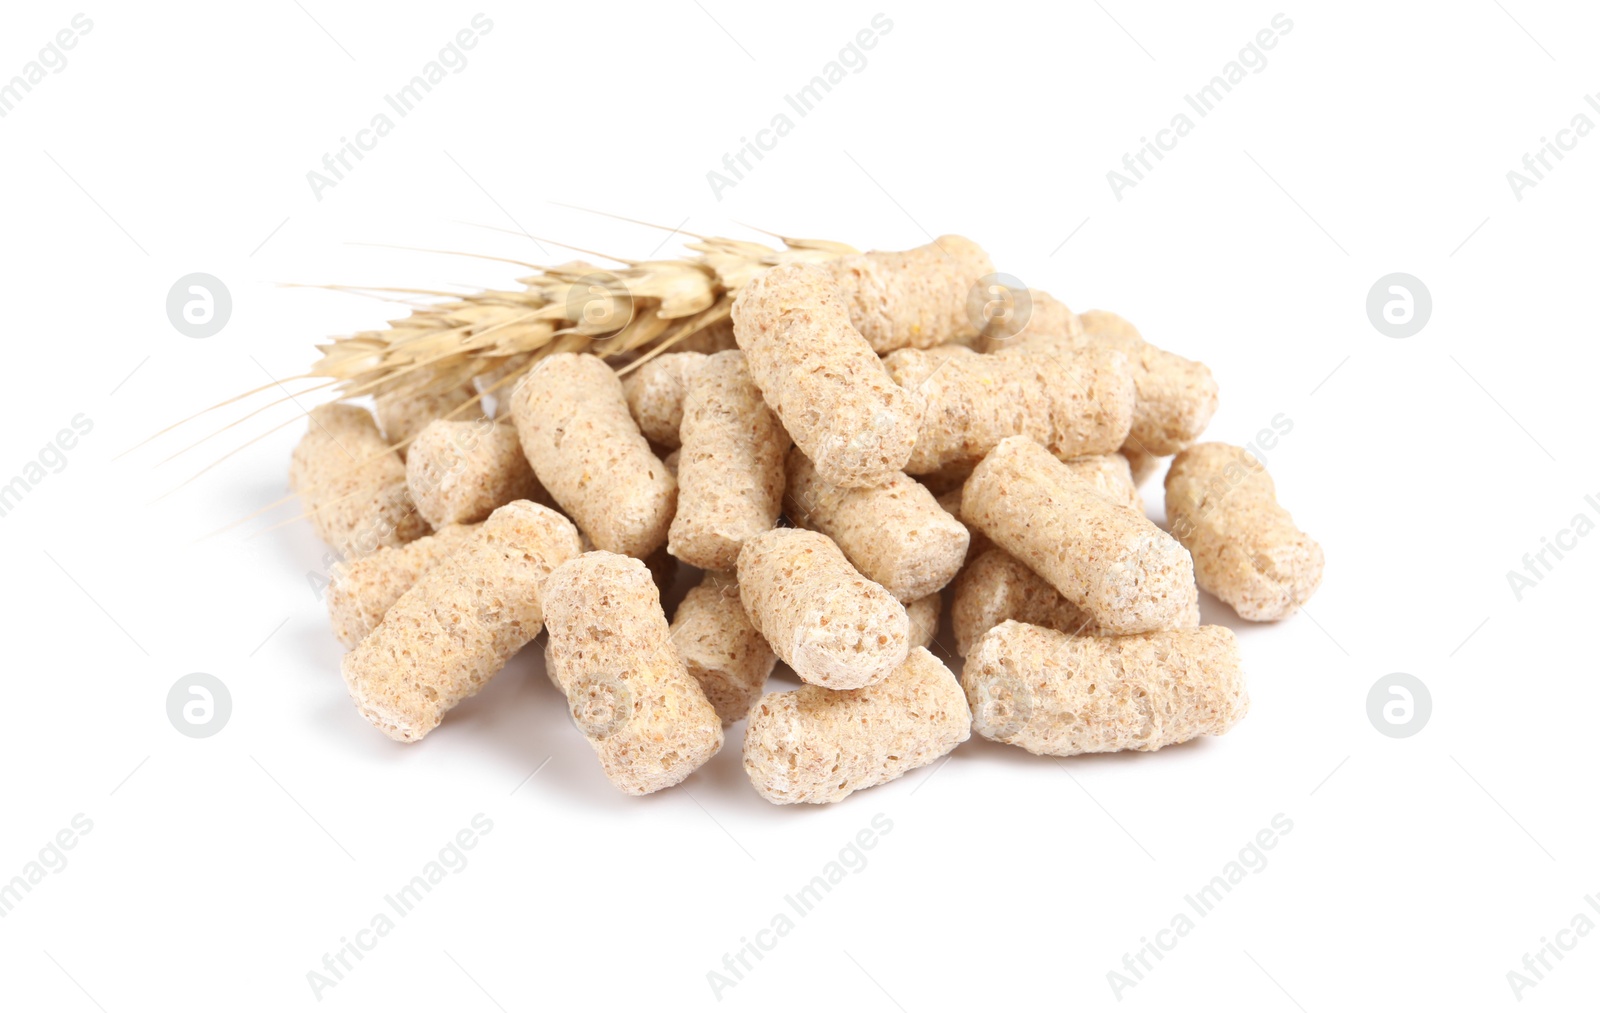 Photo of Pile of granulated wheat bran and spikelet on white background